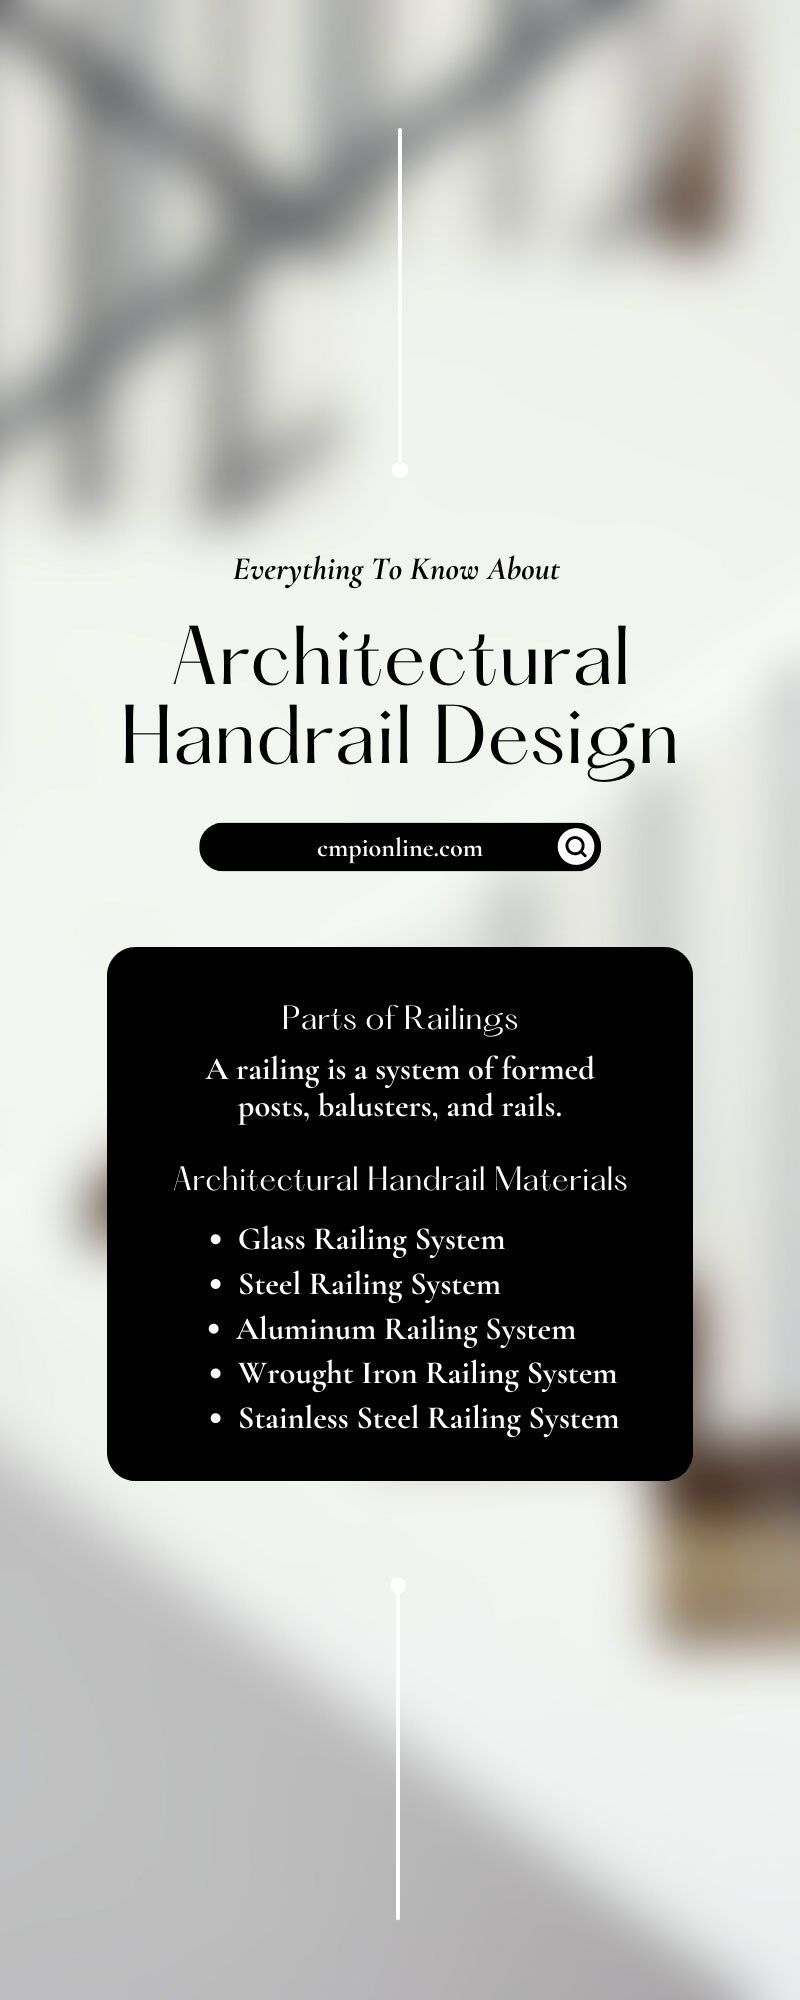 Everything To Know About Architectural Handrail Design